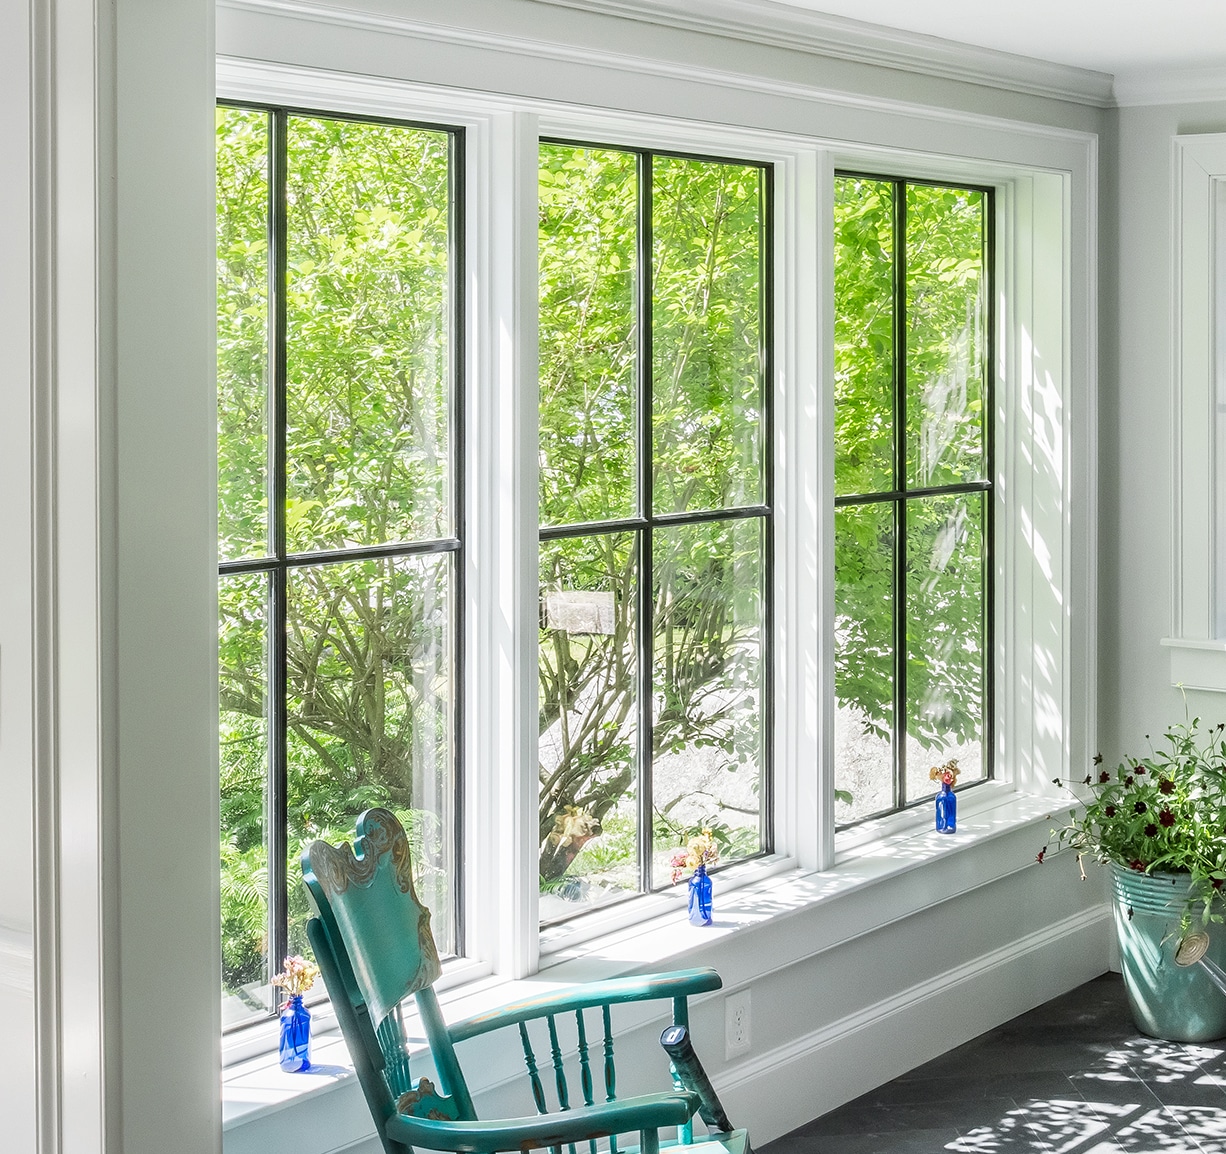 9 Popular Types of Windows for Homes - Red House Design Build